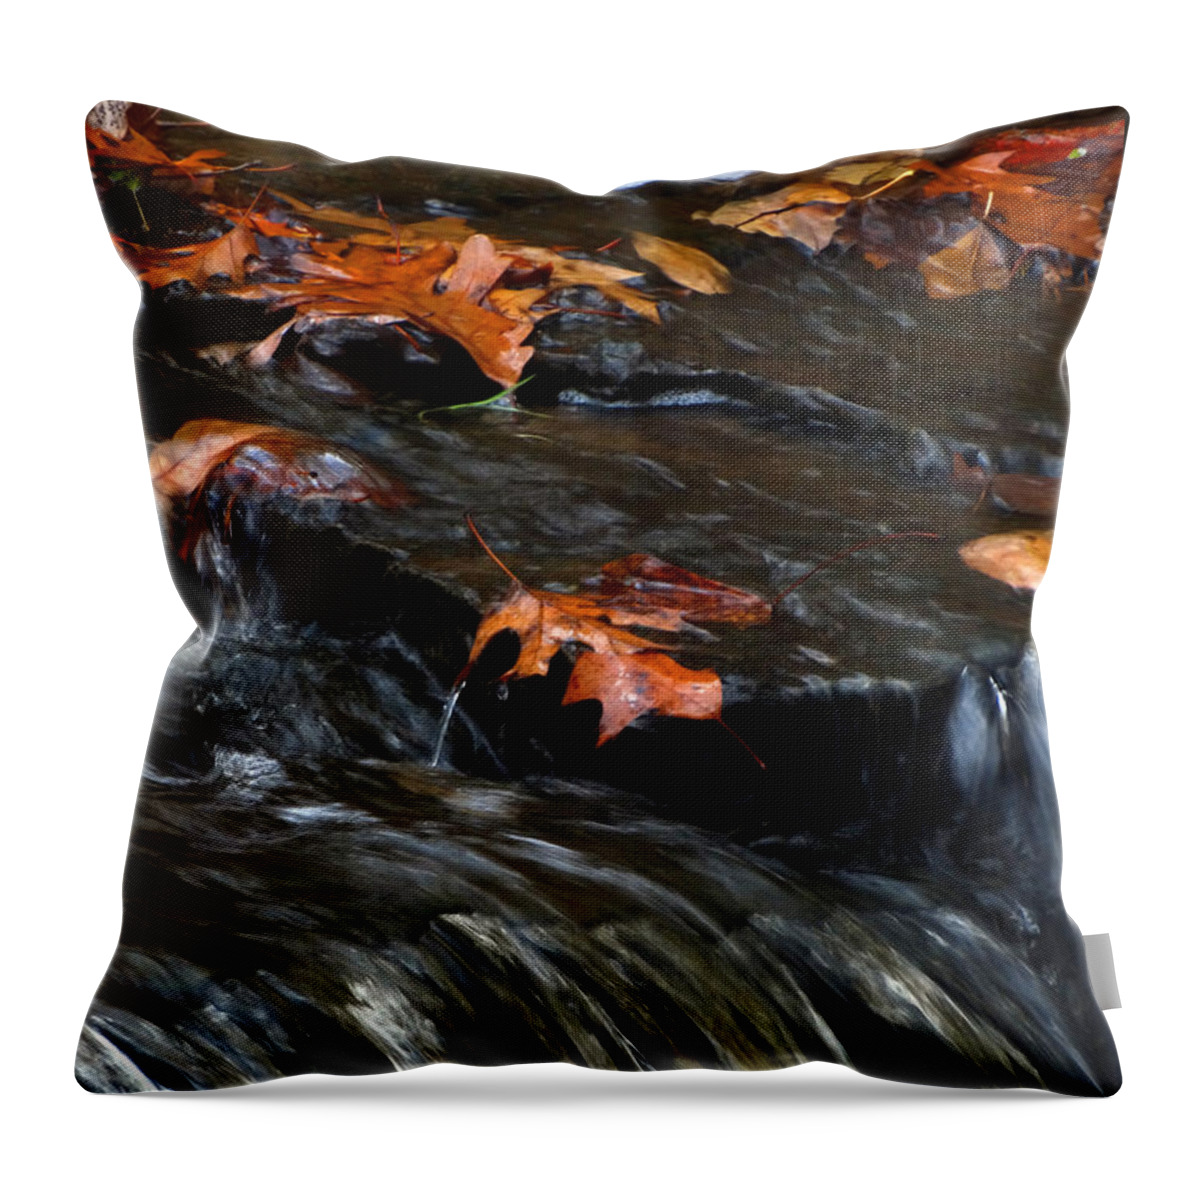 Waterfall Throw Pillow featuring the photograph Flowing Creek by David T Wilkinson